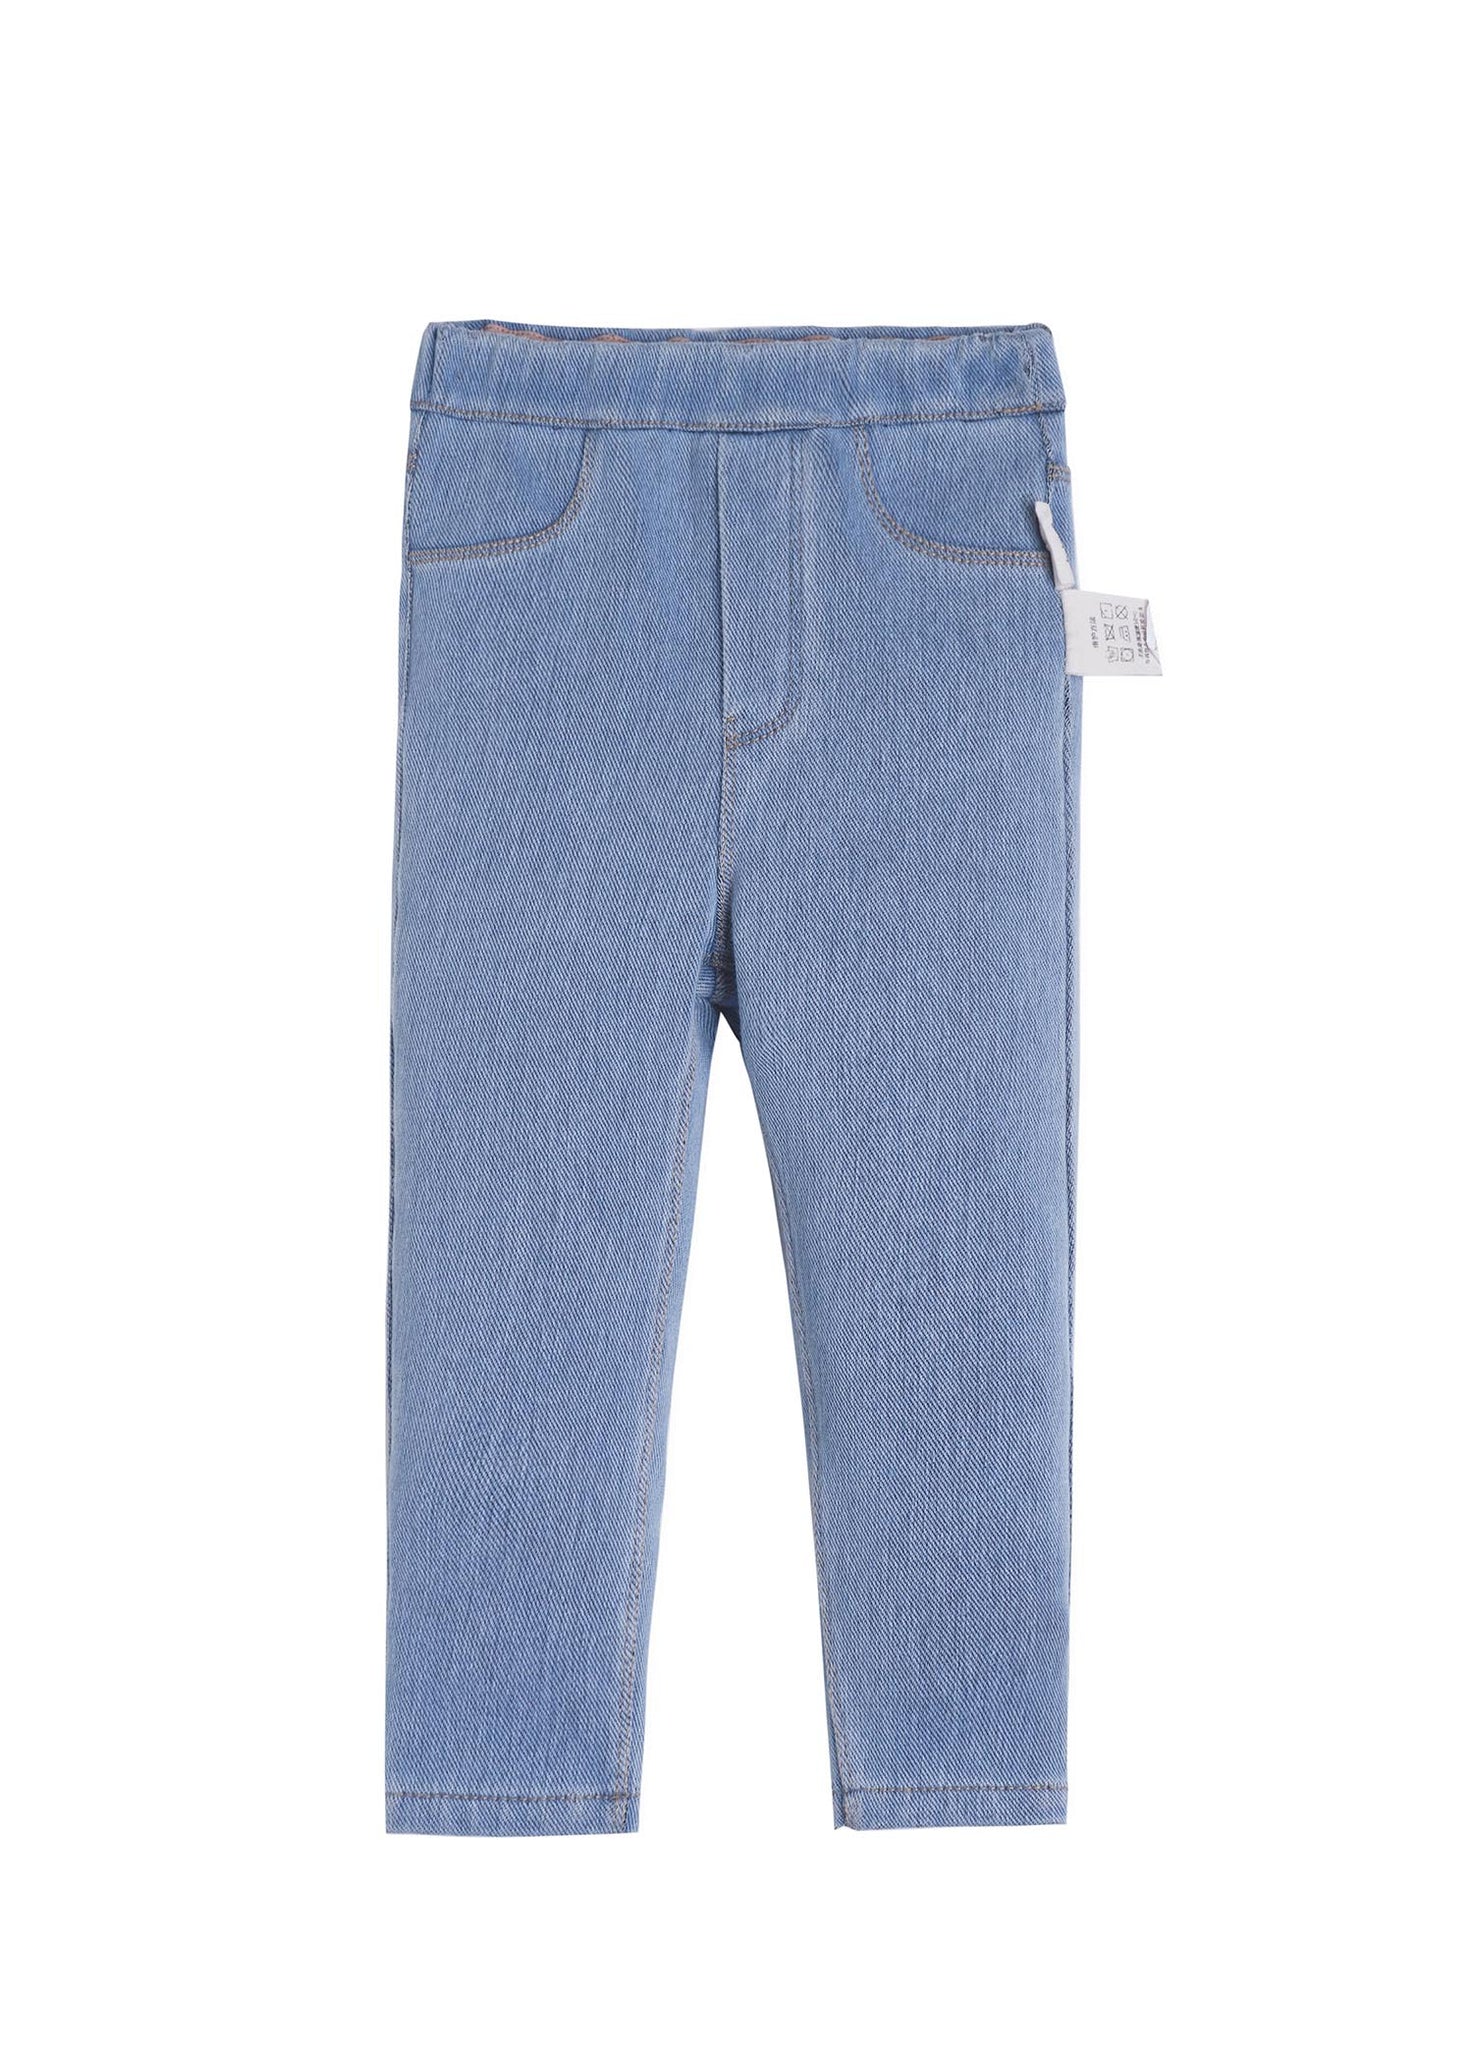 Jeans / jnby for mini Elastic Jeans